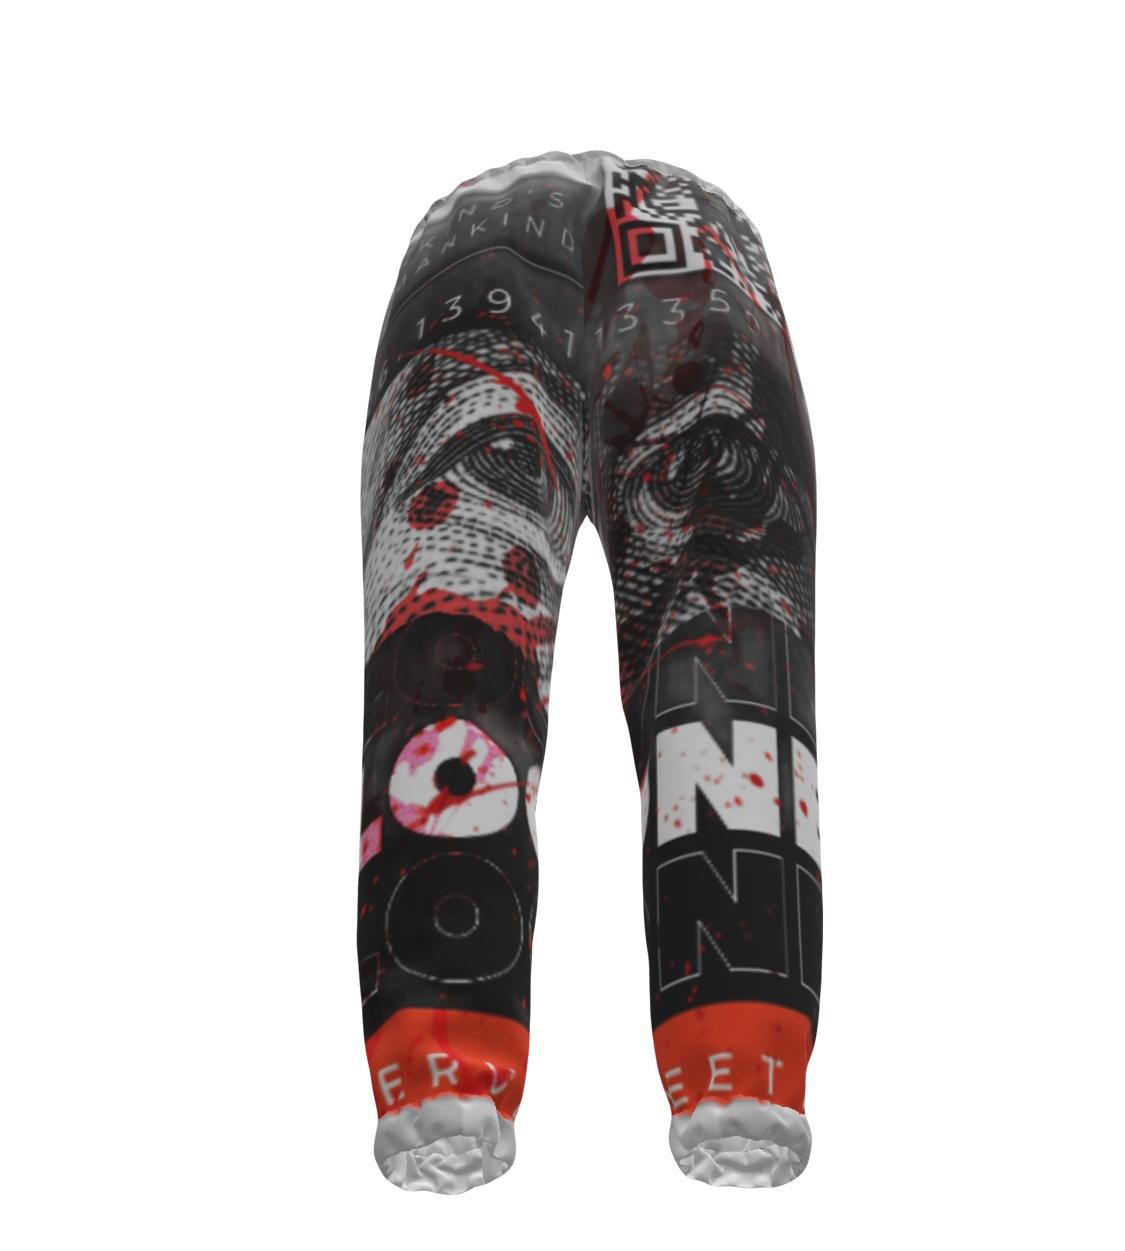 Blood Money Sweatpants that look to Elevate Your Style with Urban Edge and Attitude